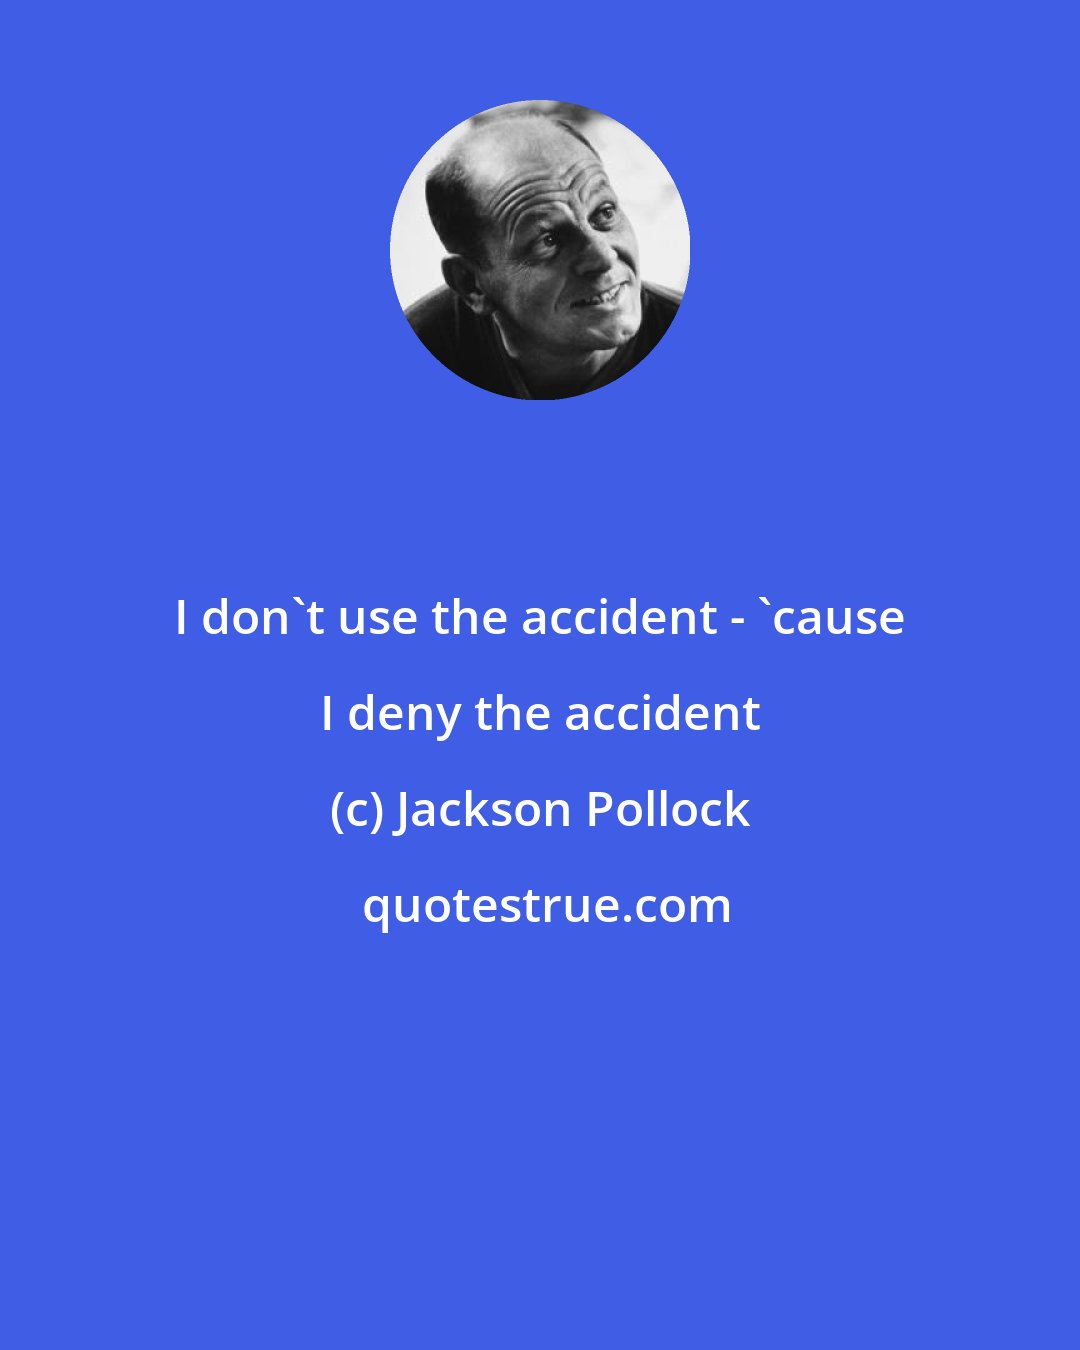 Jackson Pollock: I don't use the accident - 'cause I deny the accident